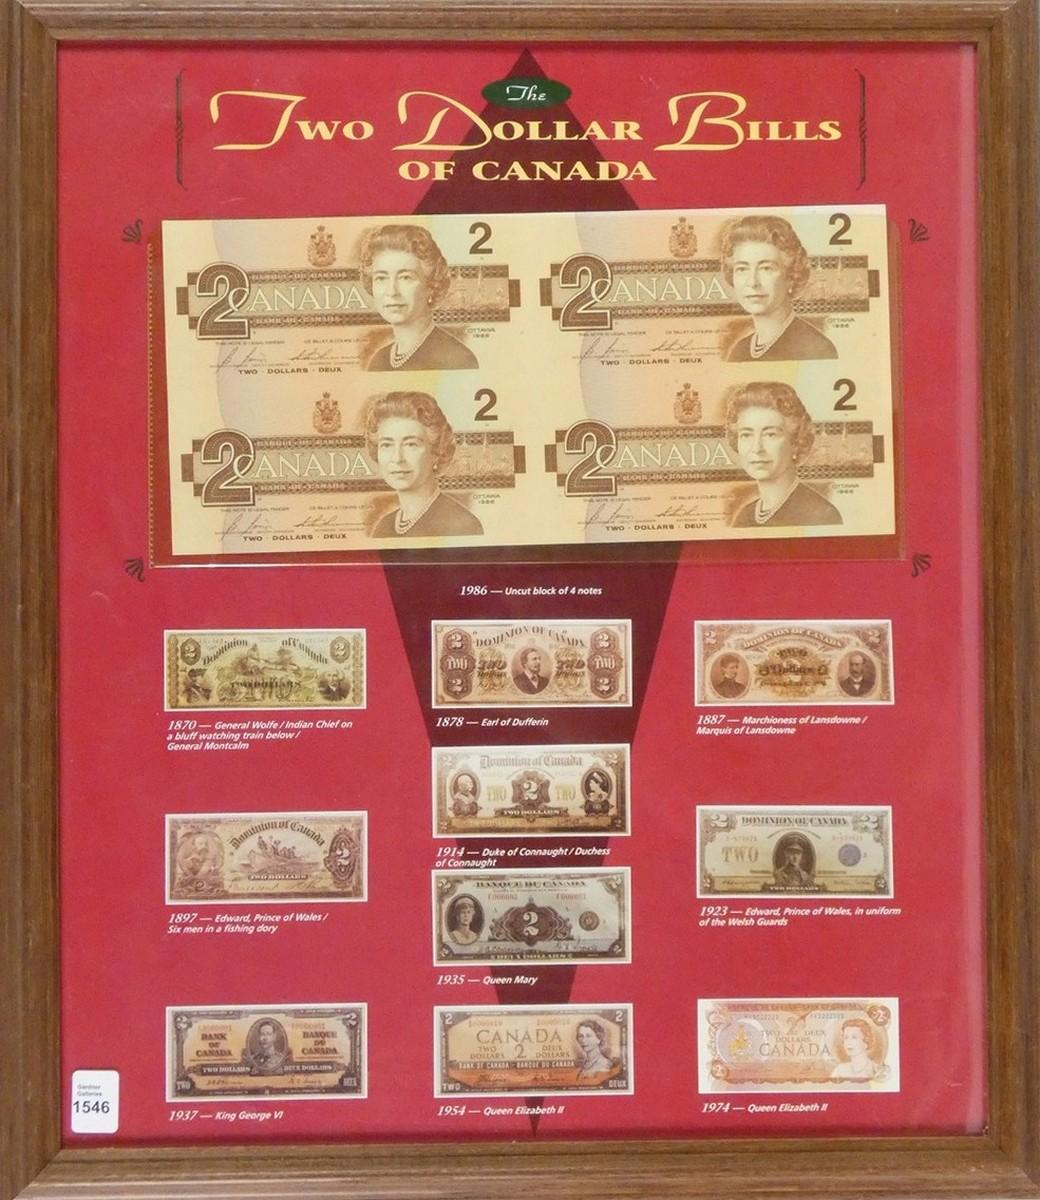 CANADIAN CURRENCY DISPLAY